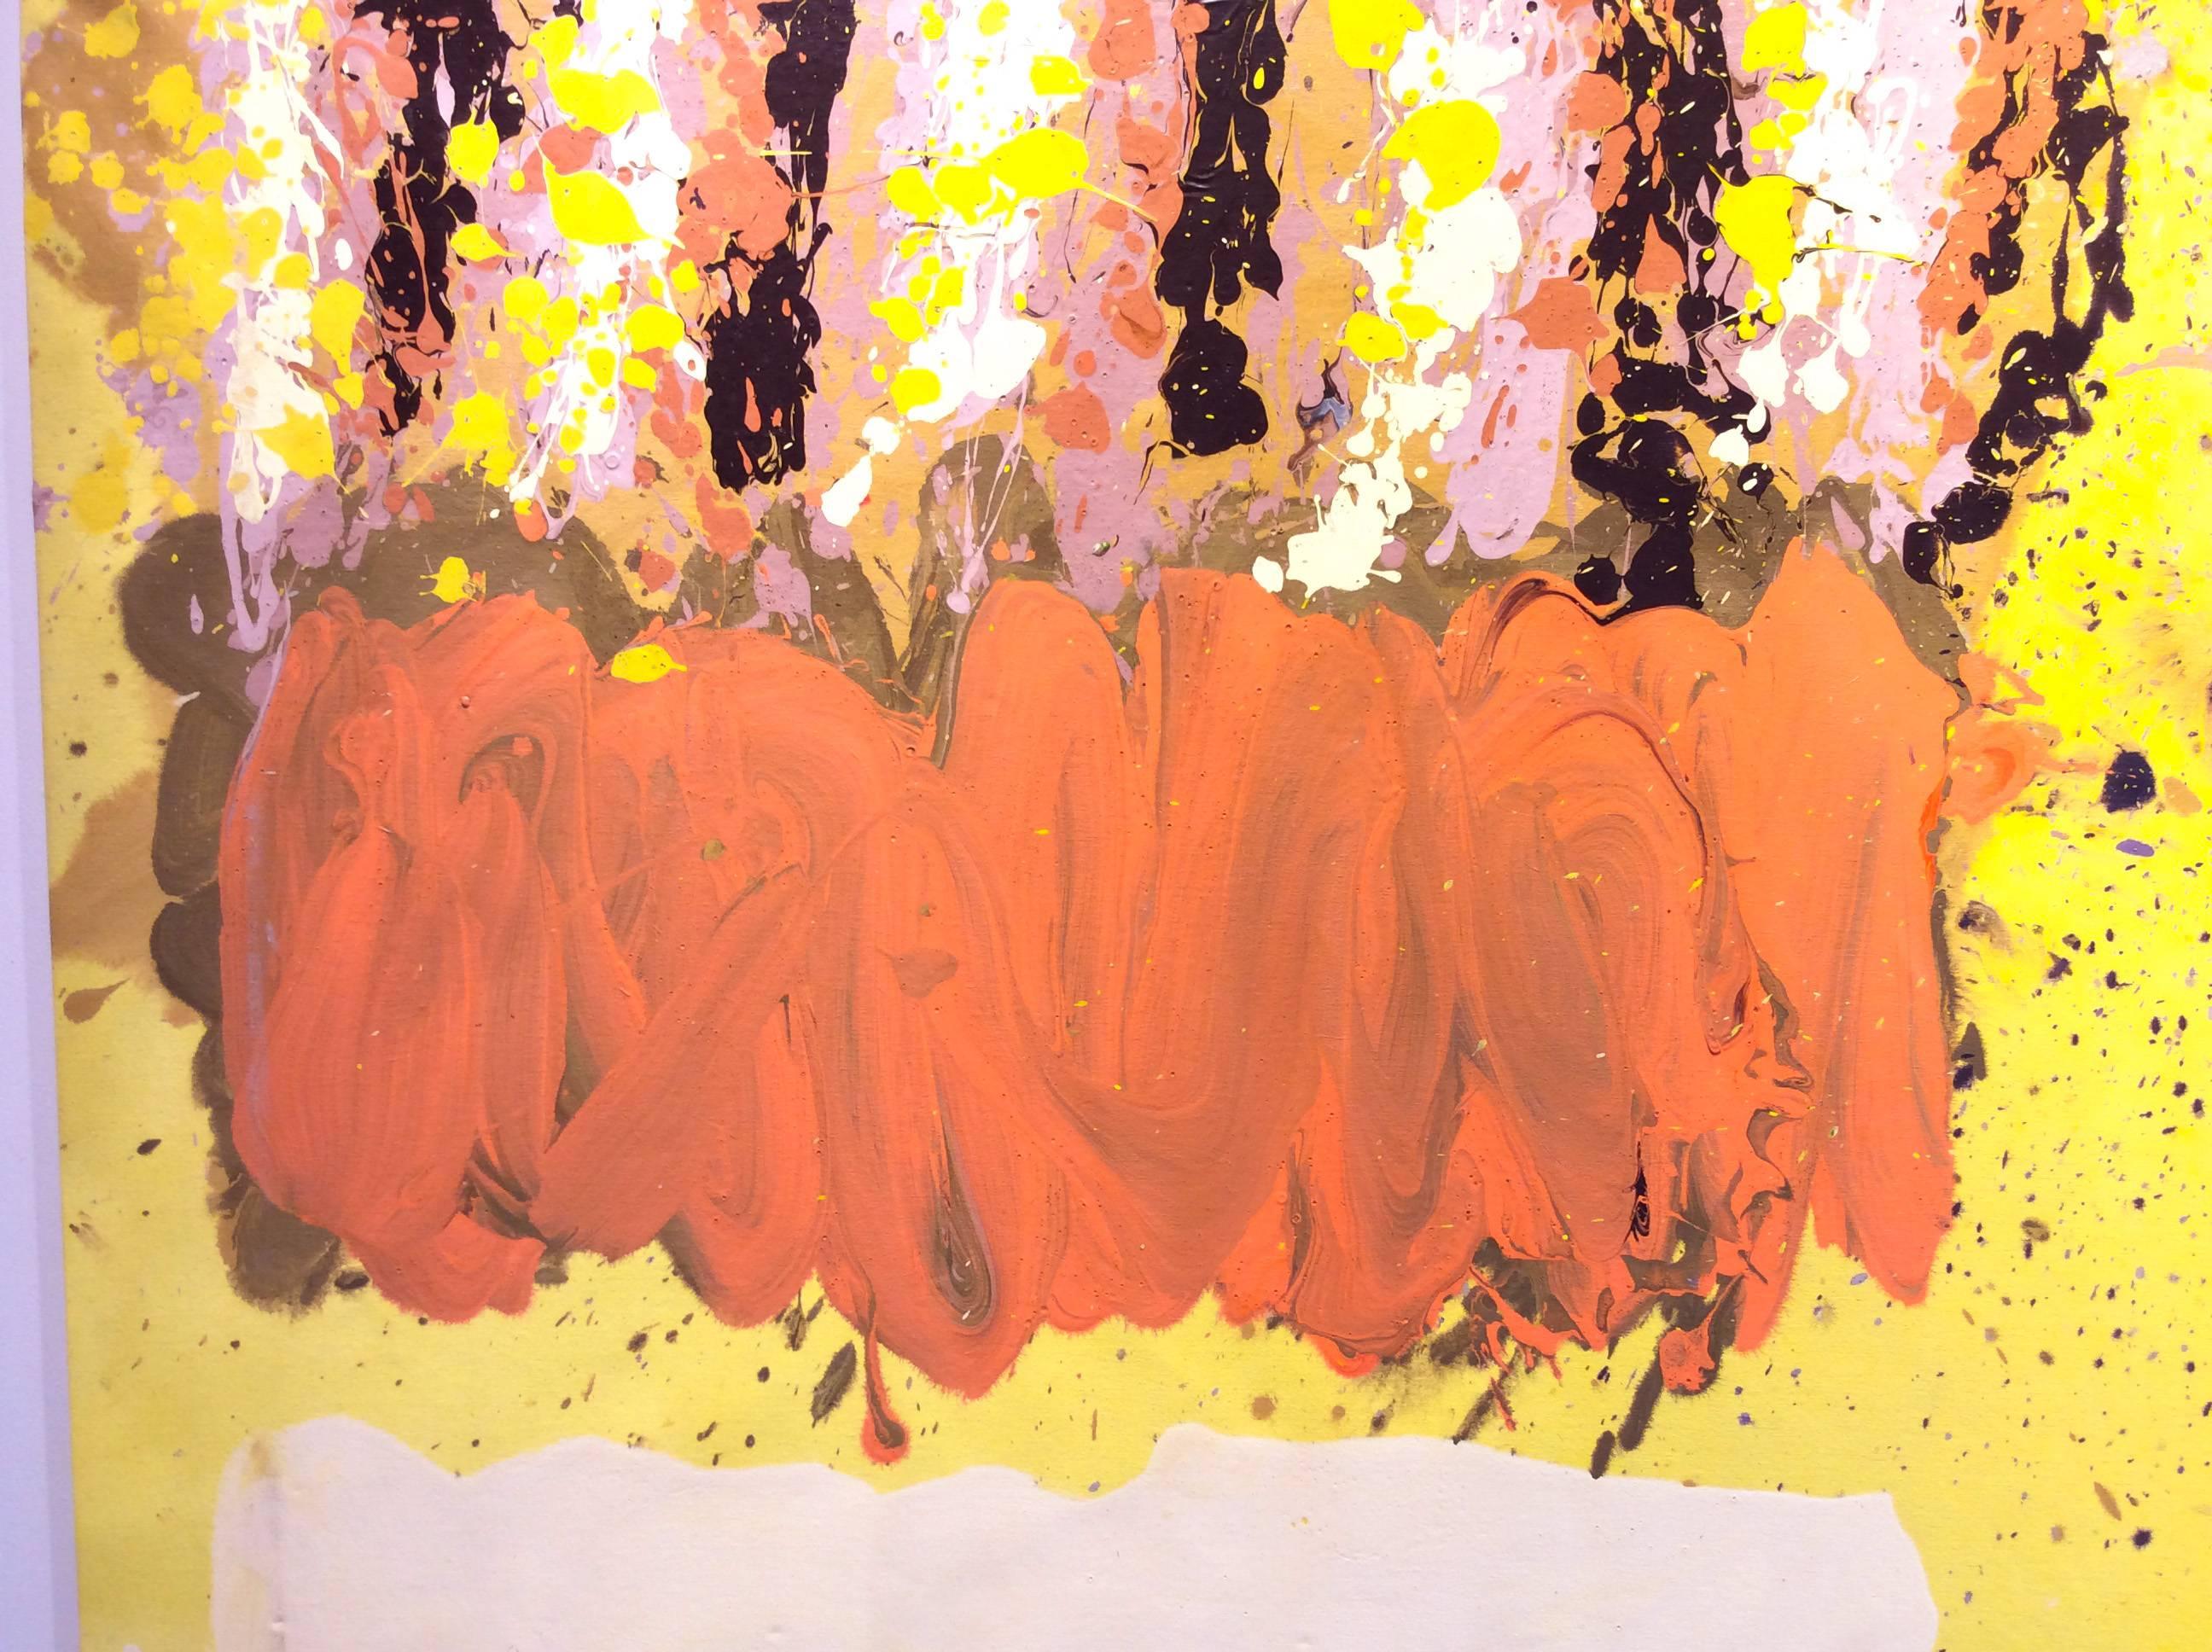 Untitled 033 (1970s Abstract Expressionist Canvas in Canary Yellow & Orange) (Gelb), Abstract Painting, von Edward Avedisian